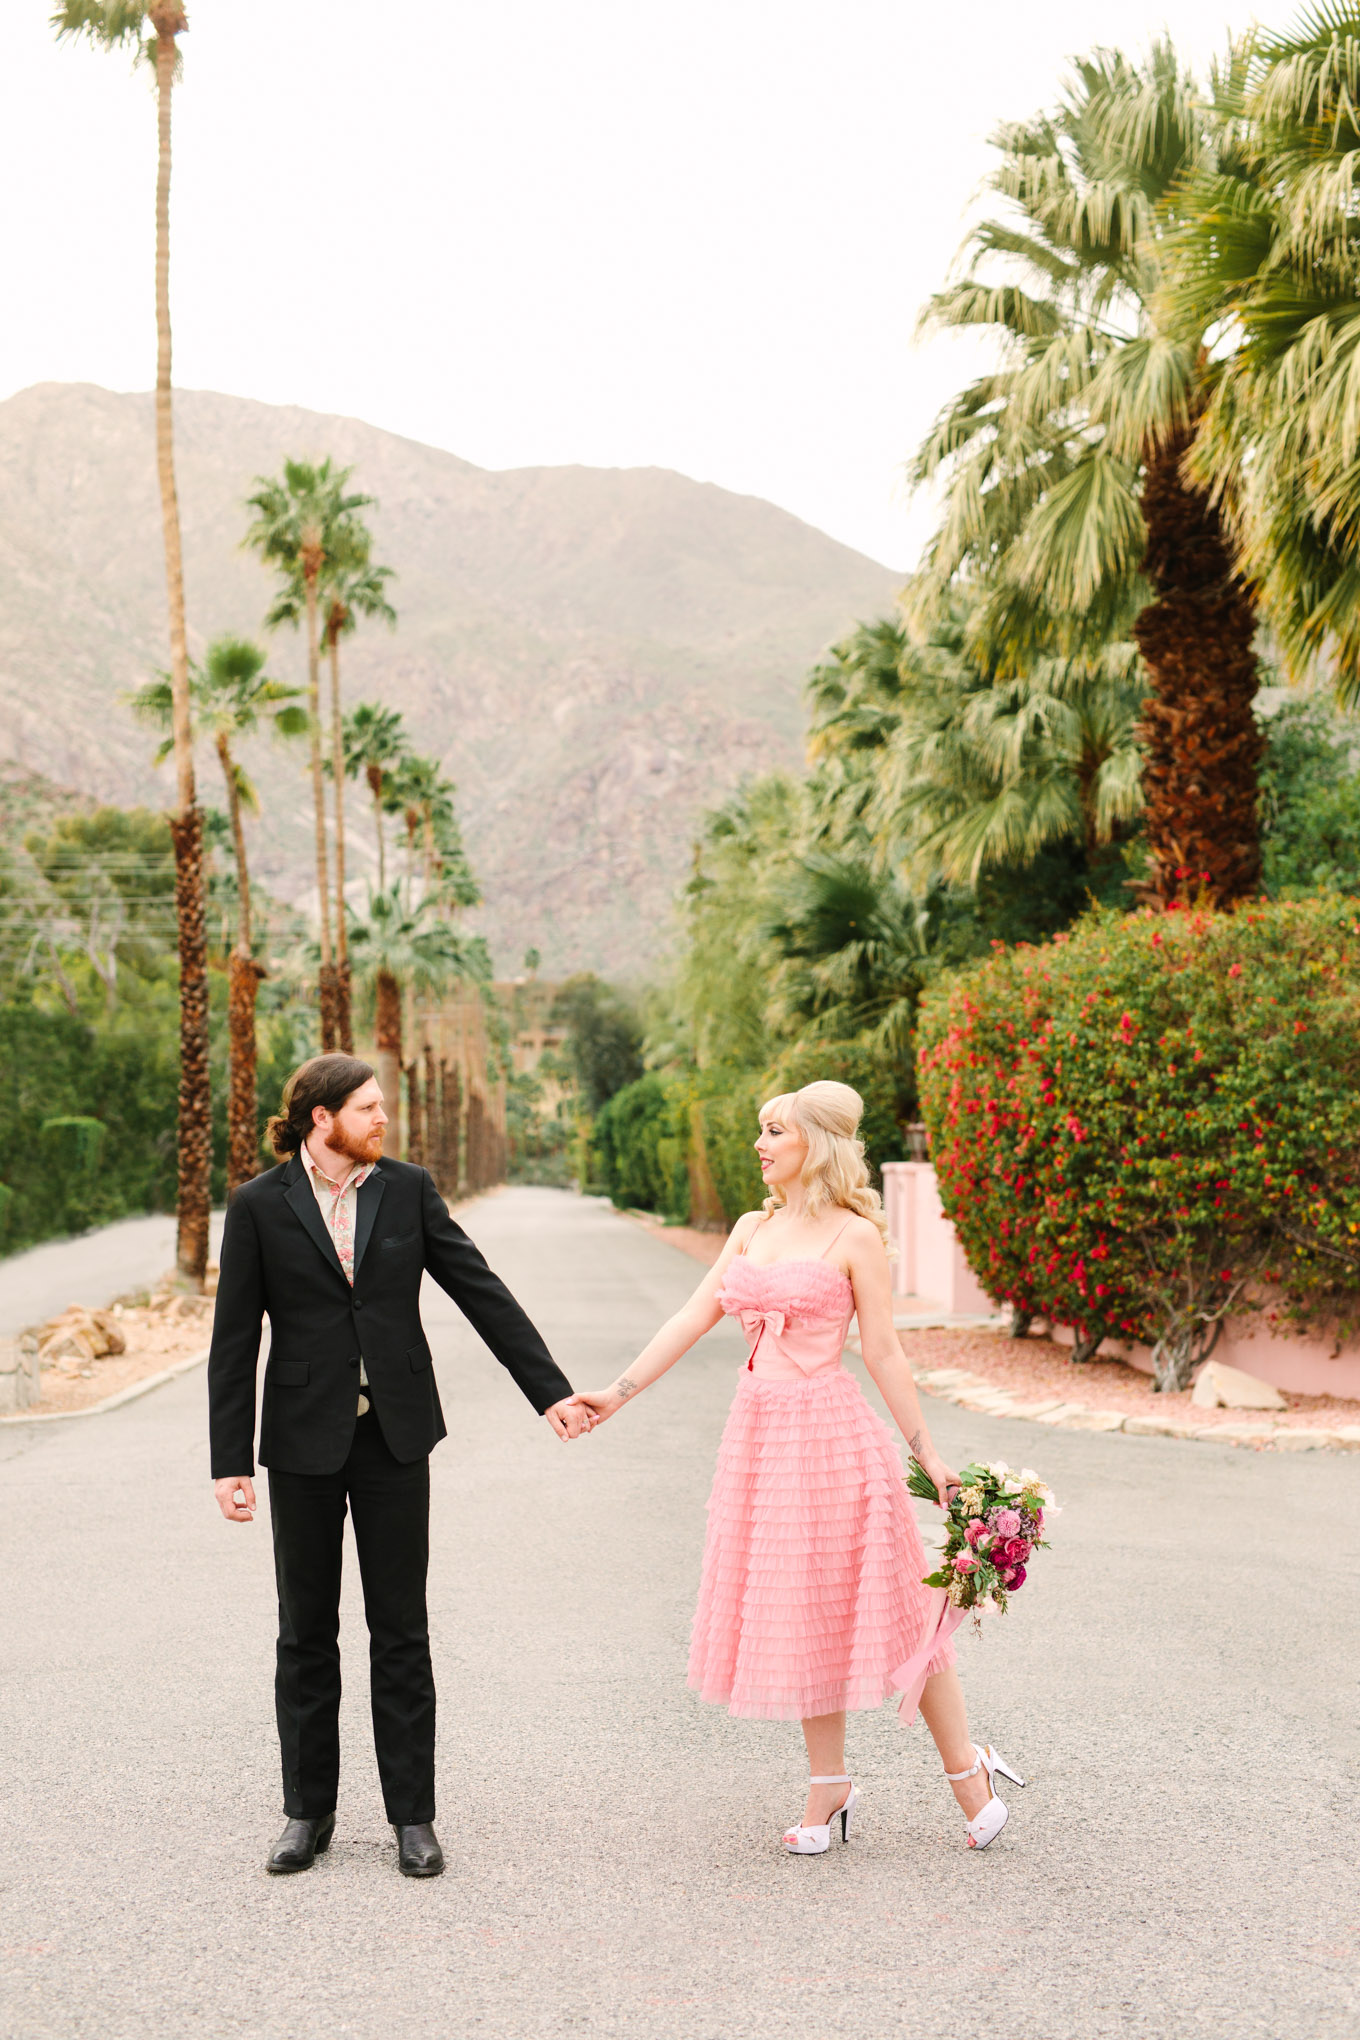 Couple walking among palm trees. Modern vintage-inspired Palm Springs engagement session with a 1960s pink Cadillac, retro clothing, and flowers by Shindig Chic. | Colorful and elevated wedding inspiration for fun-loving couples in Southern California | #engagementsession #PalmSpringsengagement #vintageweddingdress #floralcar #pinkcar   Source: Mary Costa Photography | Los Angeles